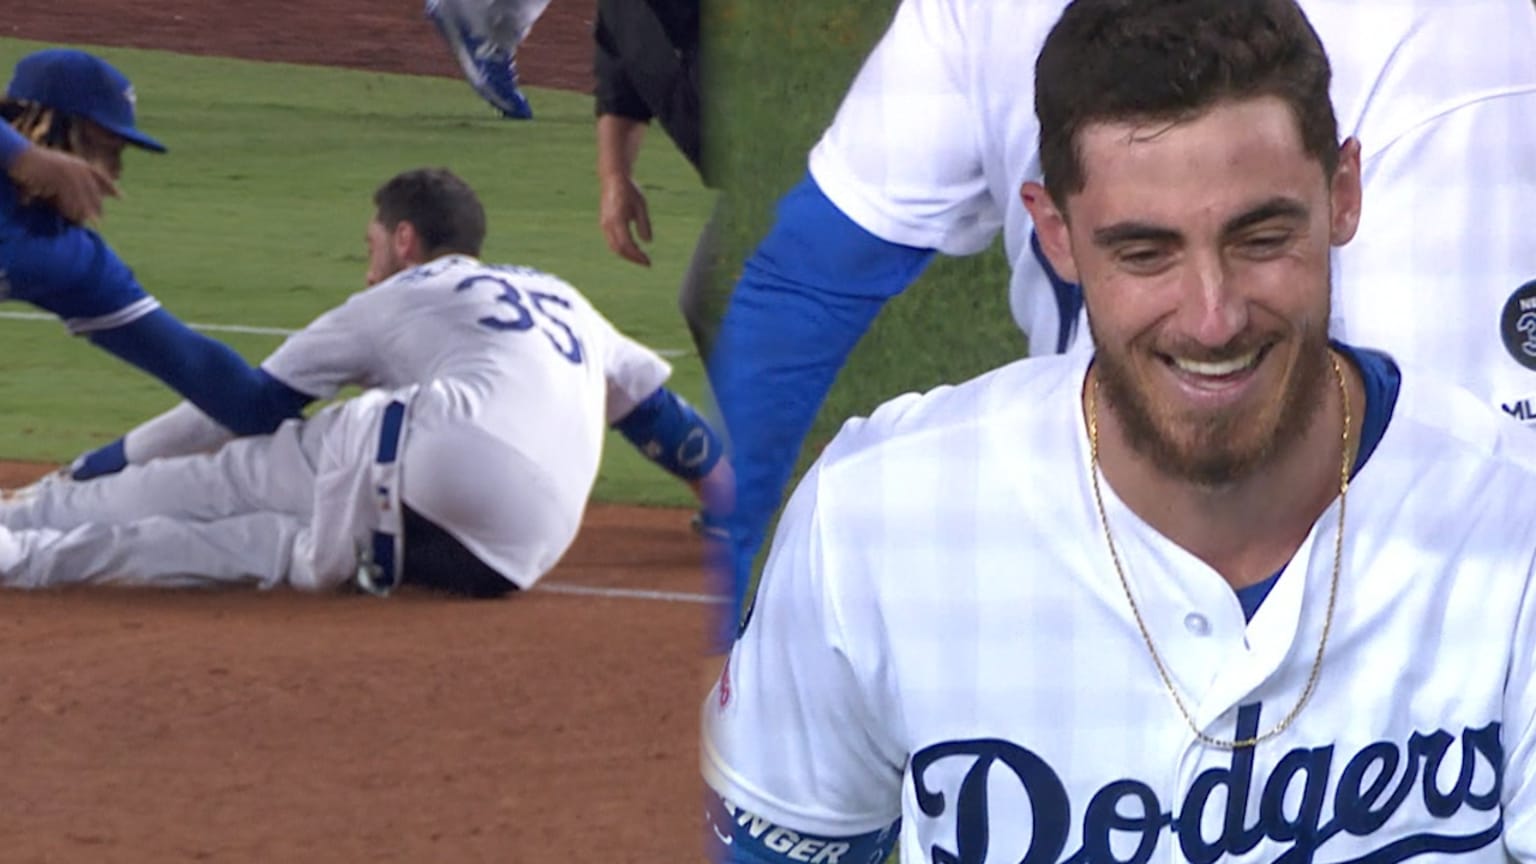 Talkin' Baseball on X: Cody Bellinger gave a kid his cleats after